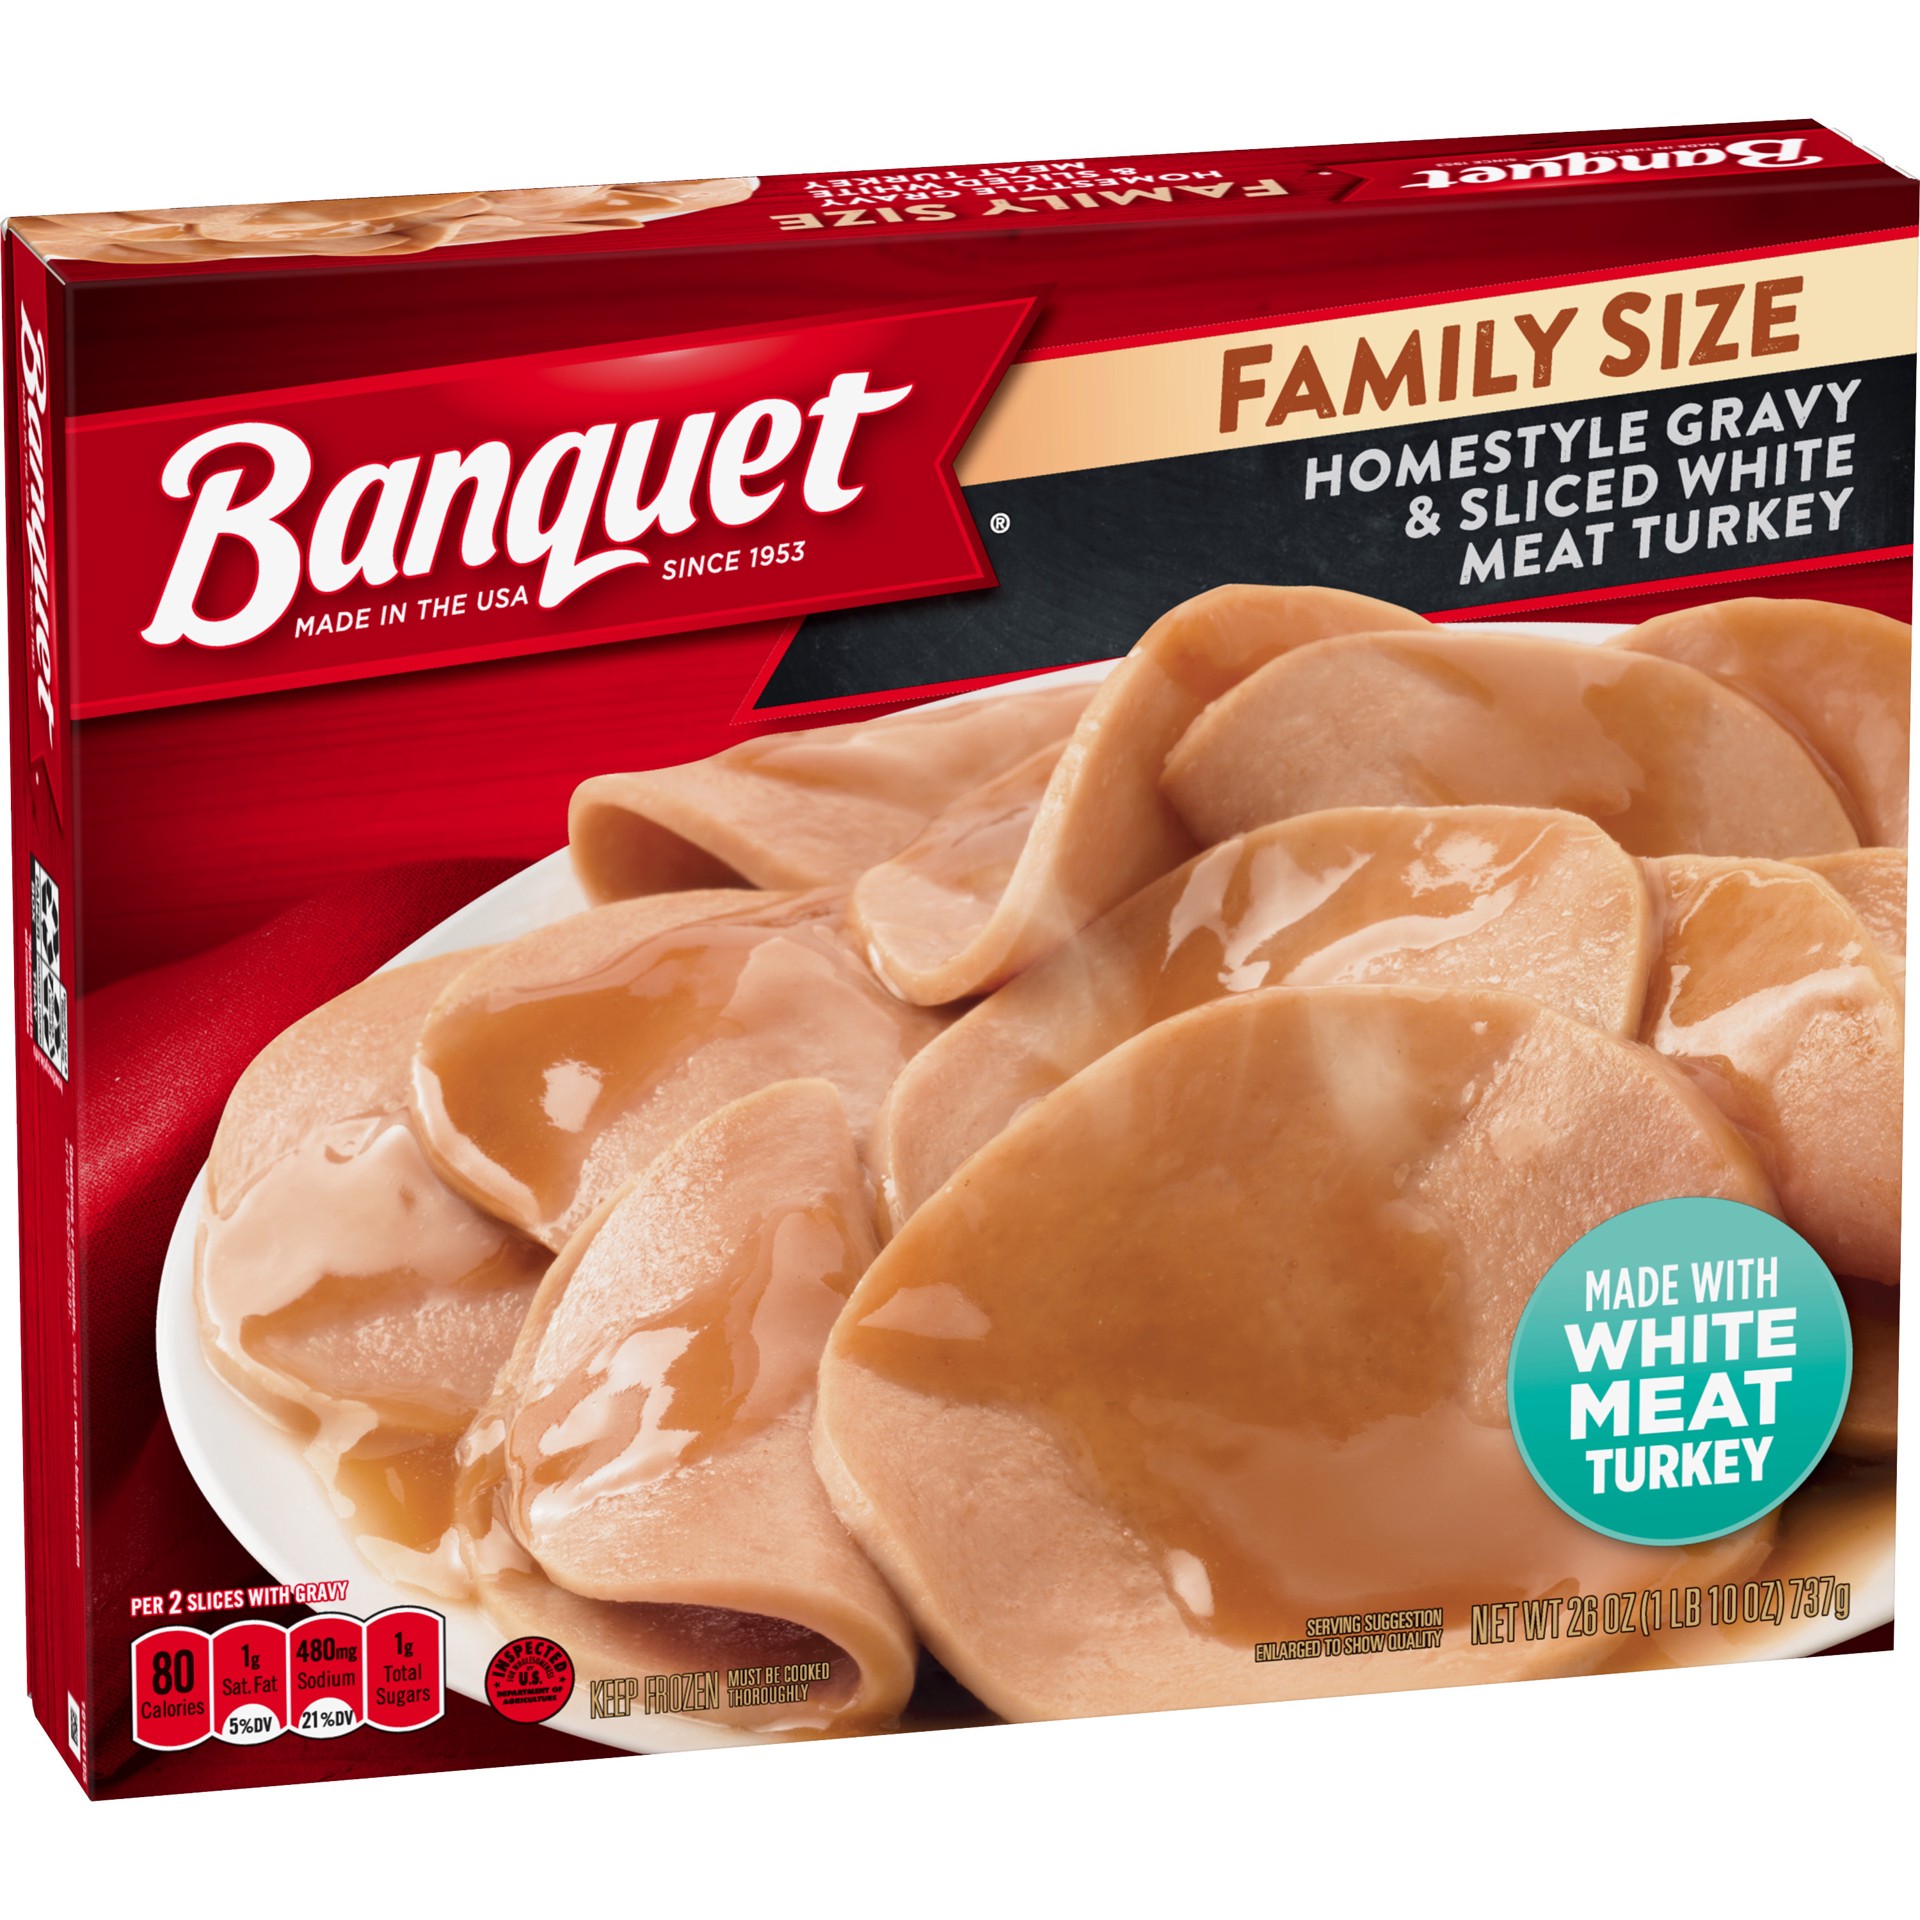 slide 4 of 5, Banquet Family Size Homestyle Gravy and Sliced White Meat Turkey, Frozen Meal, 26 OZ, 26 oz